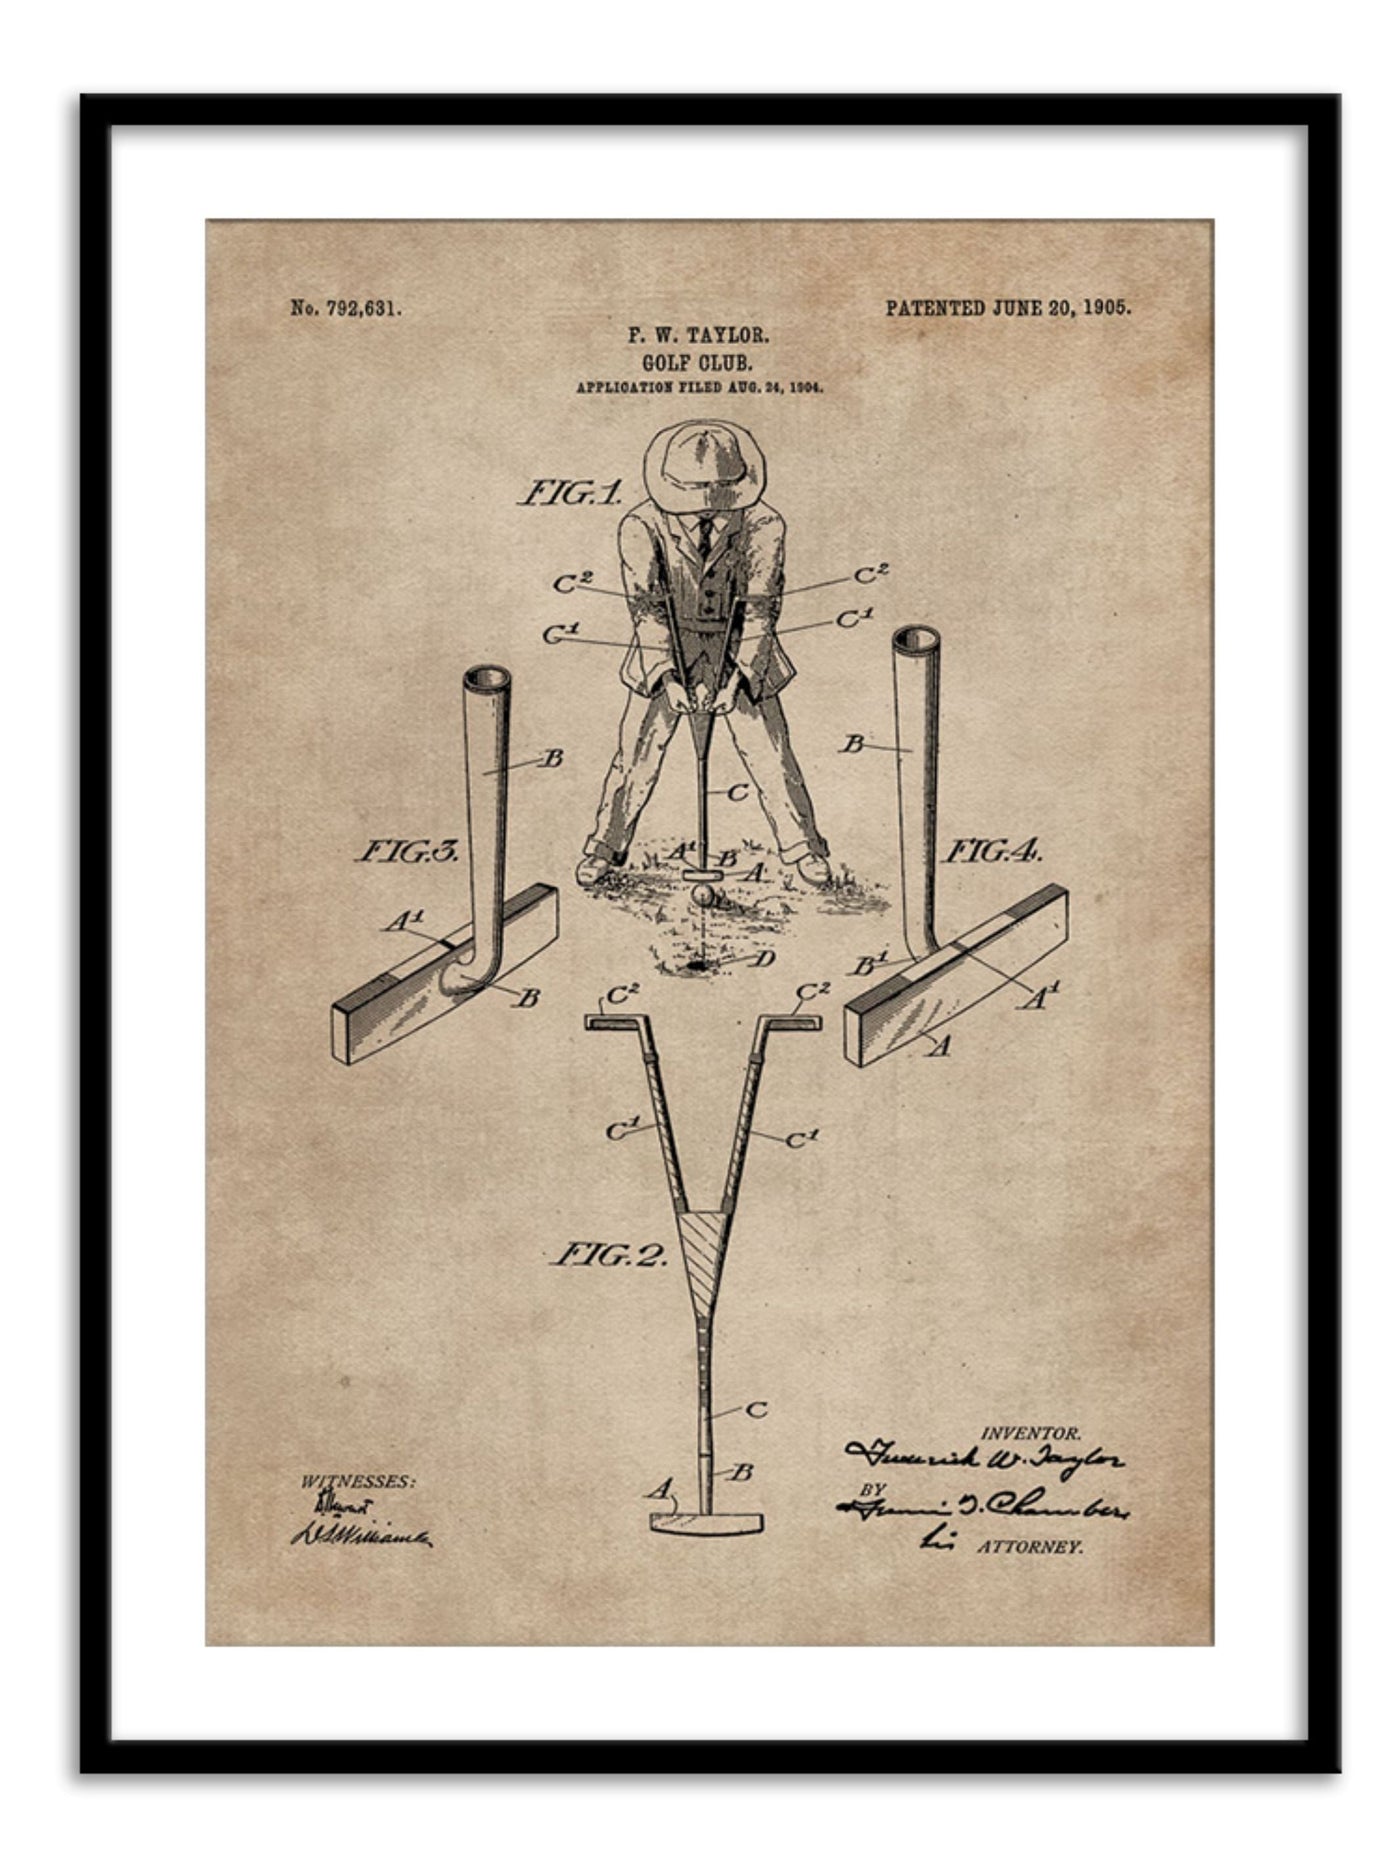 Patent Document of a Golf Club Wall Prints